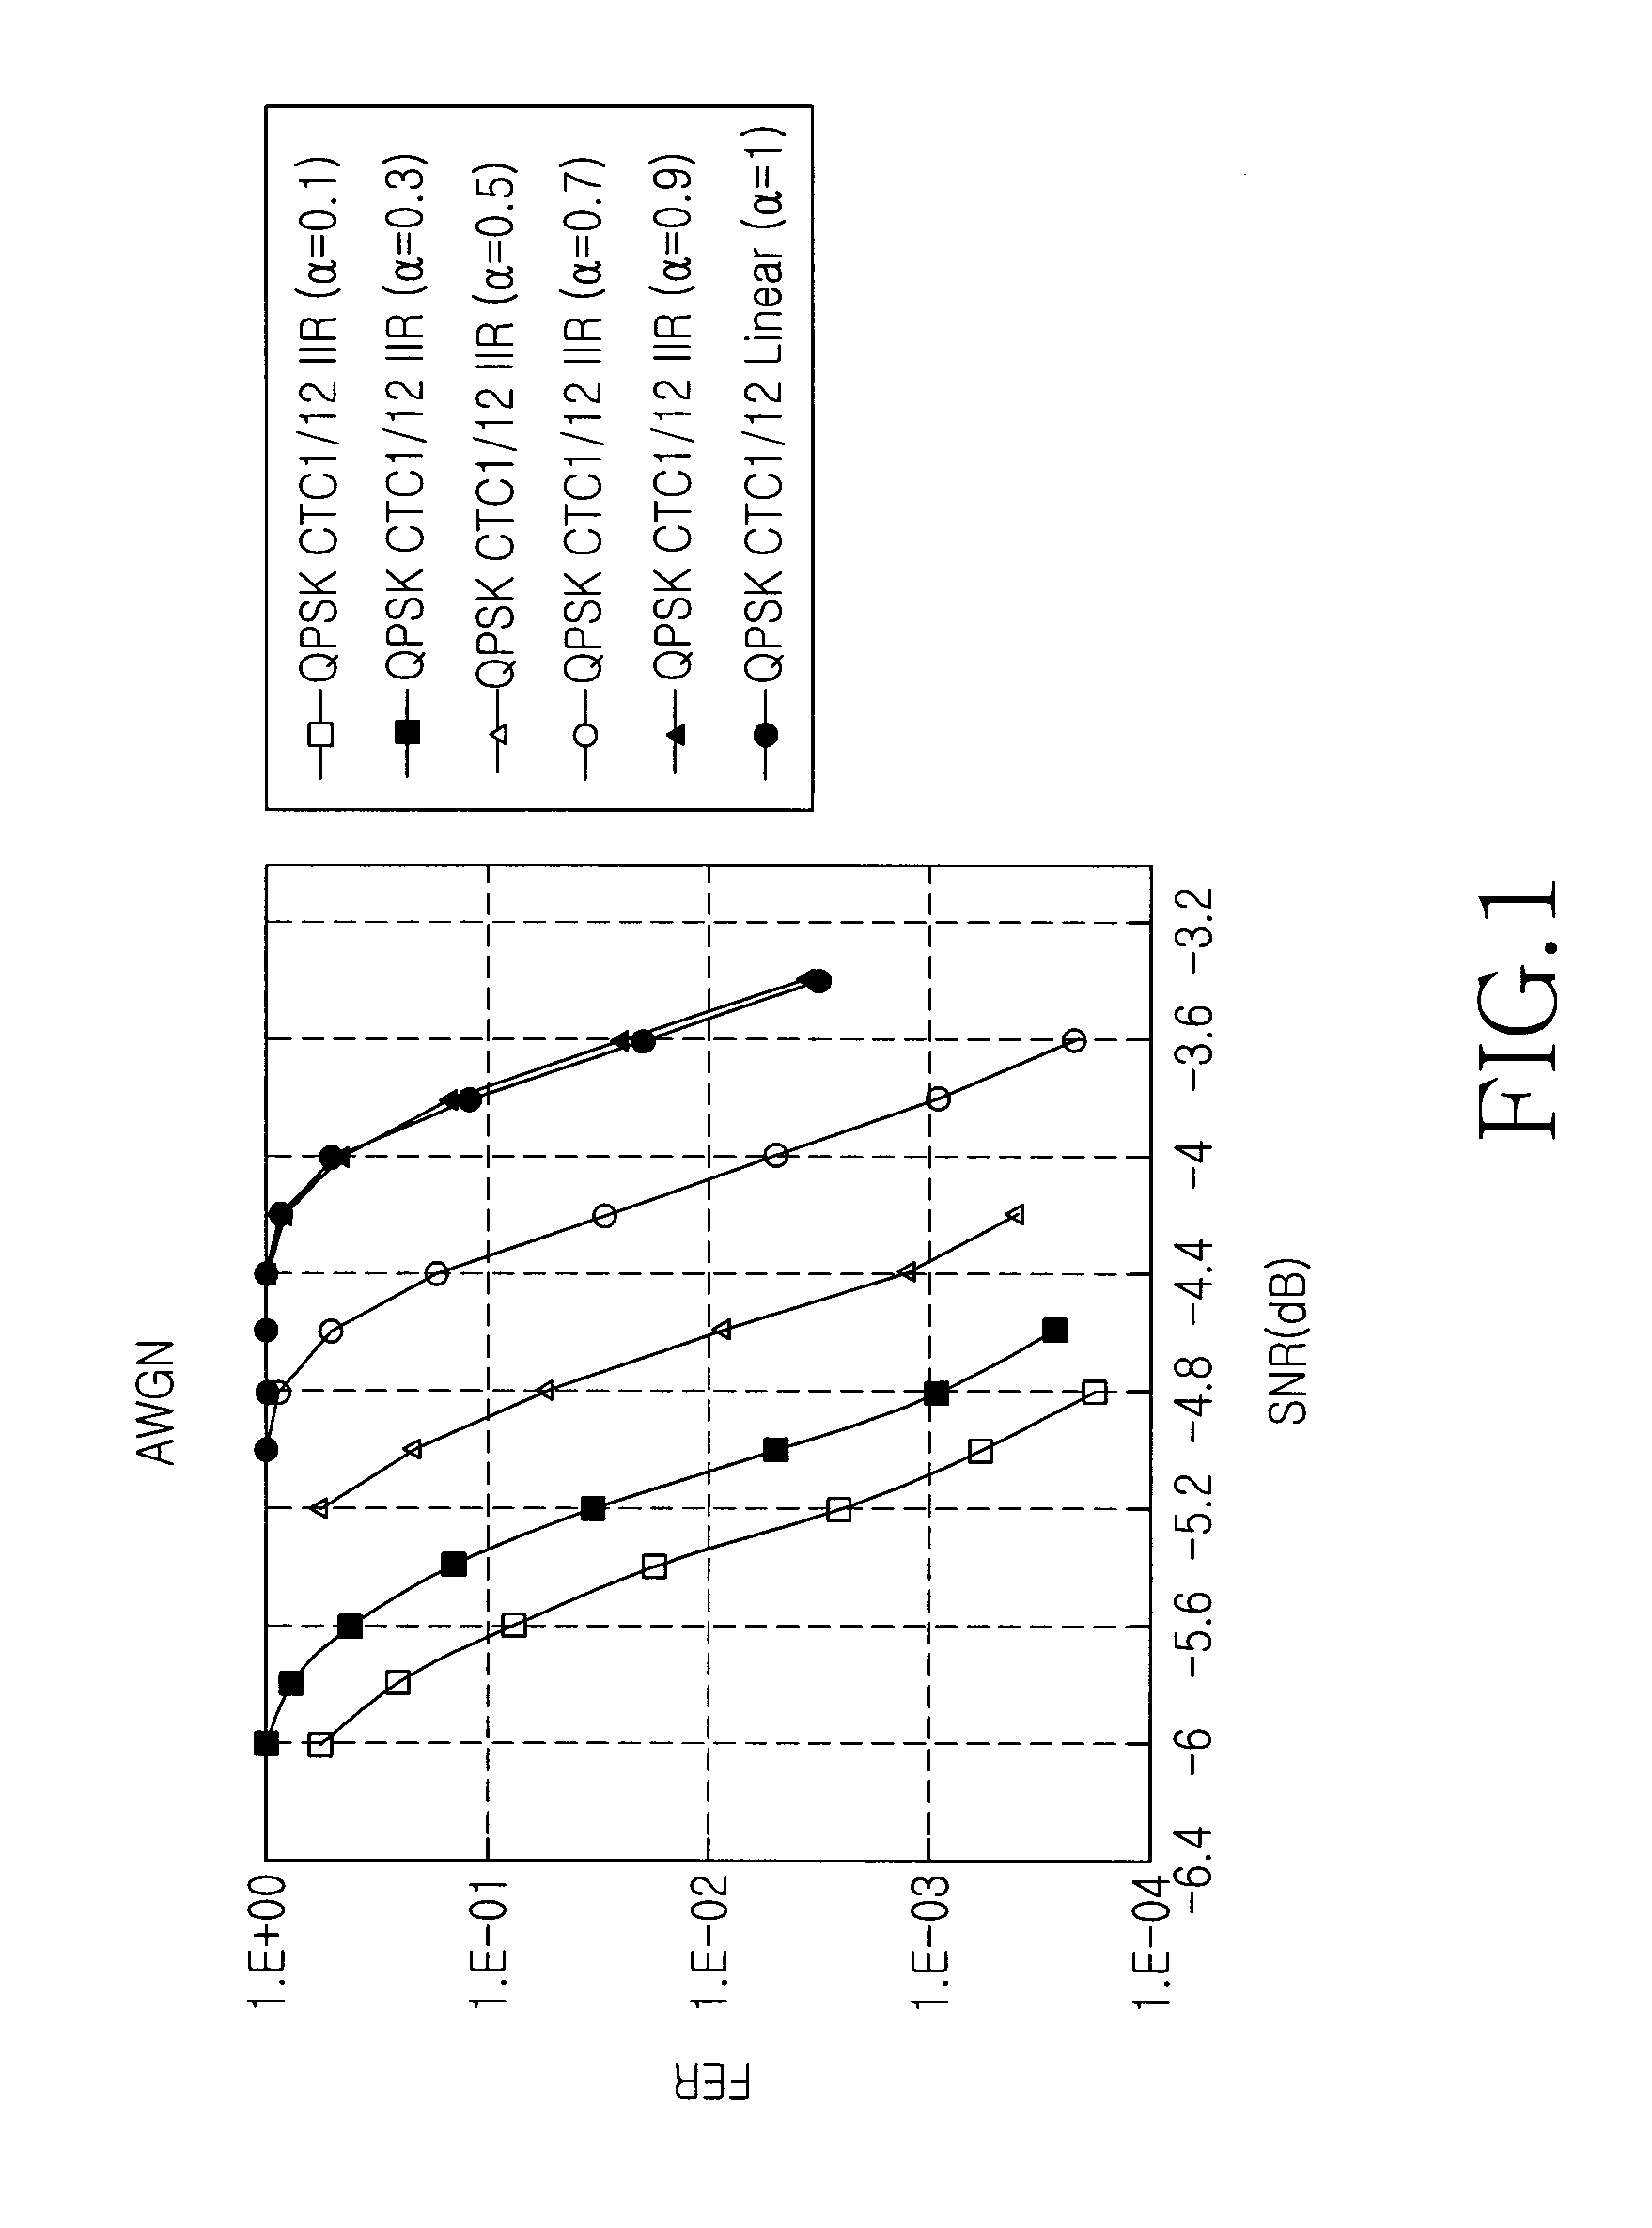 Apparatus and method for channel estimation in an orthogonal frequency division multiplexing system